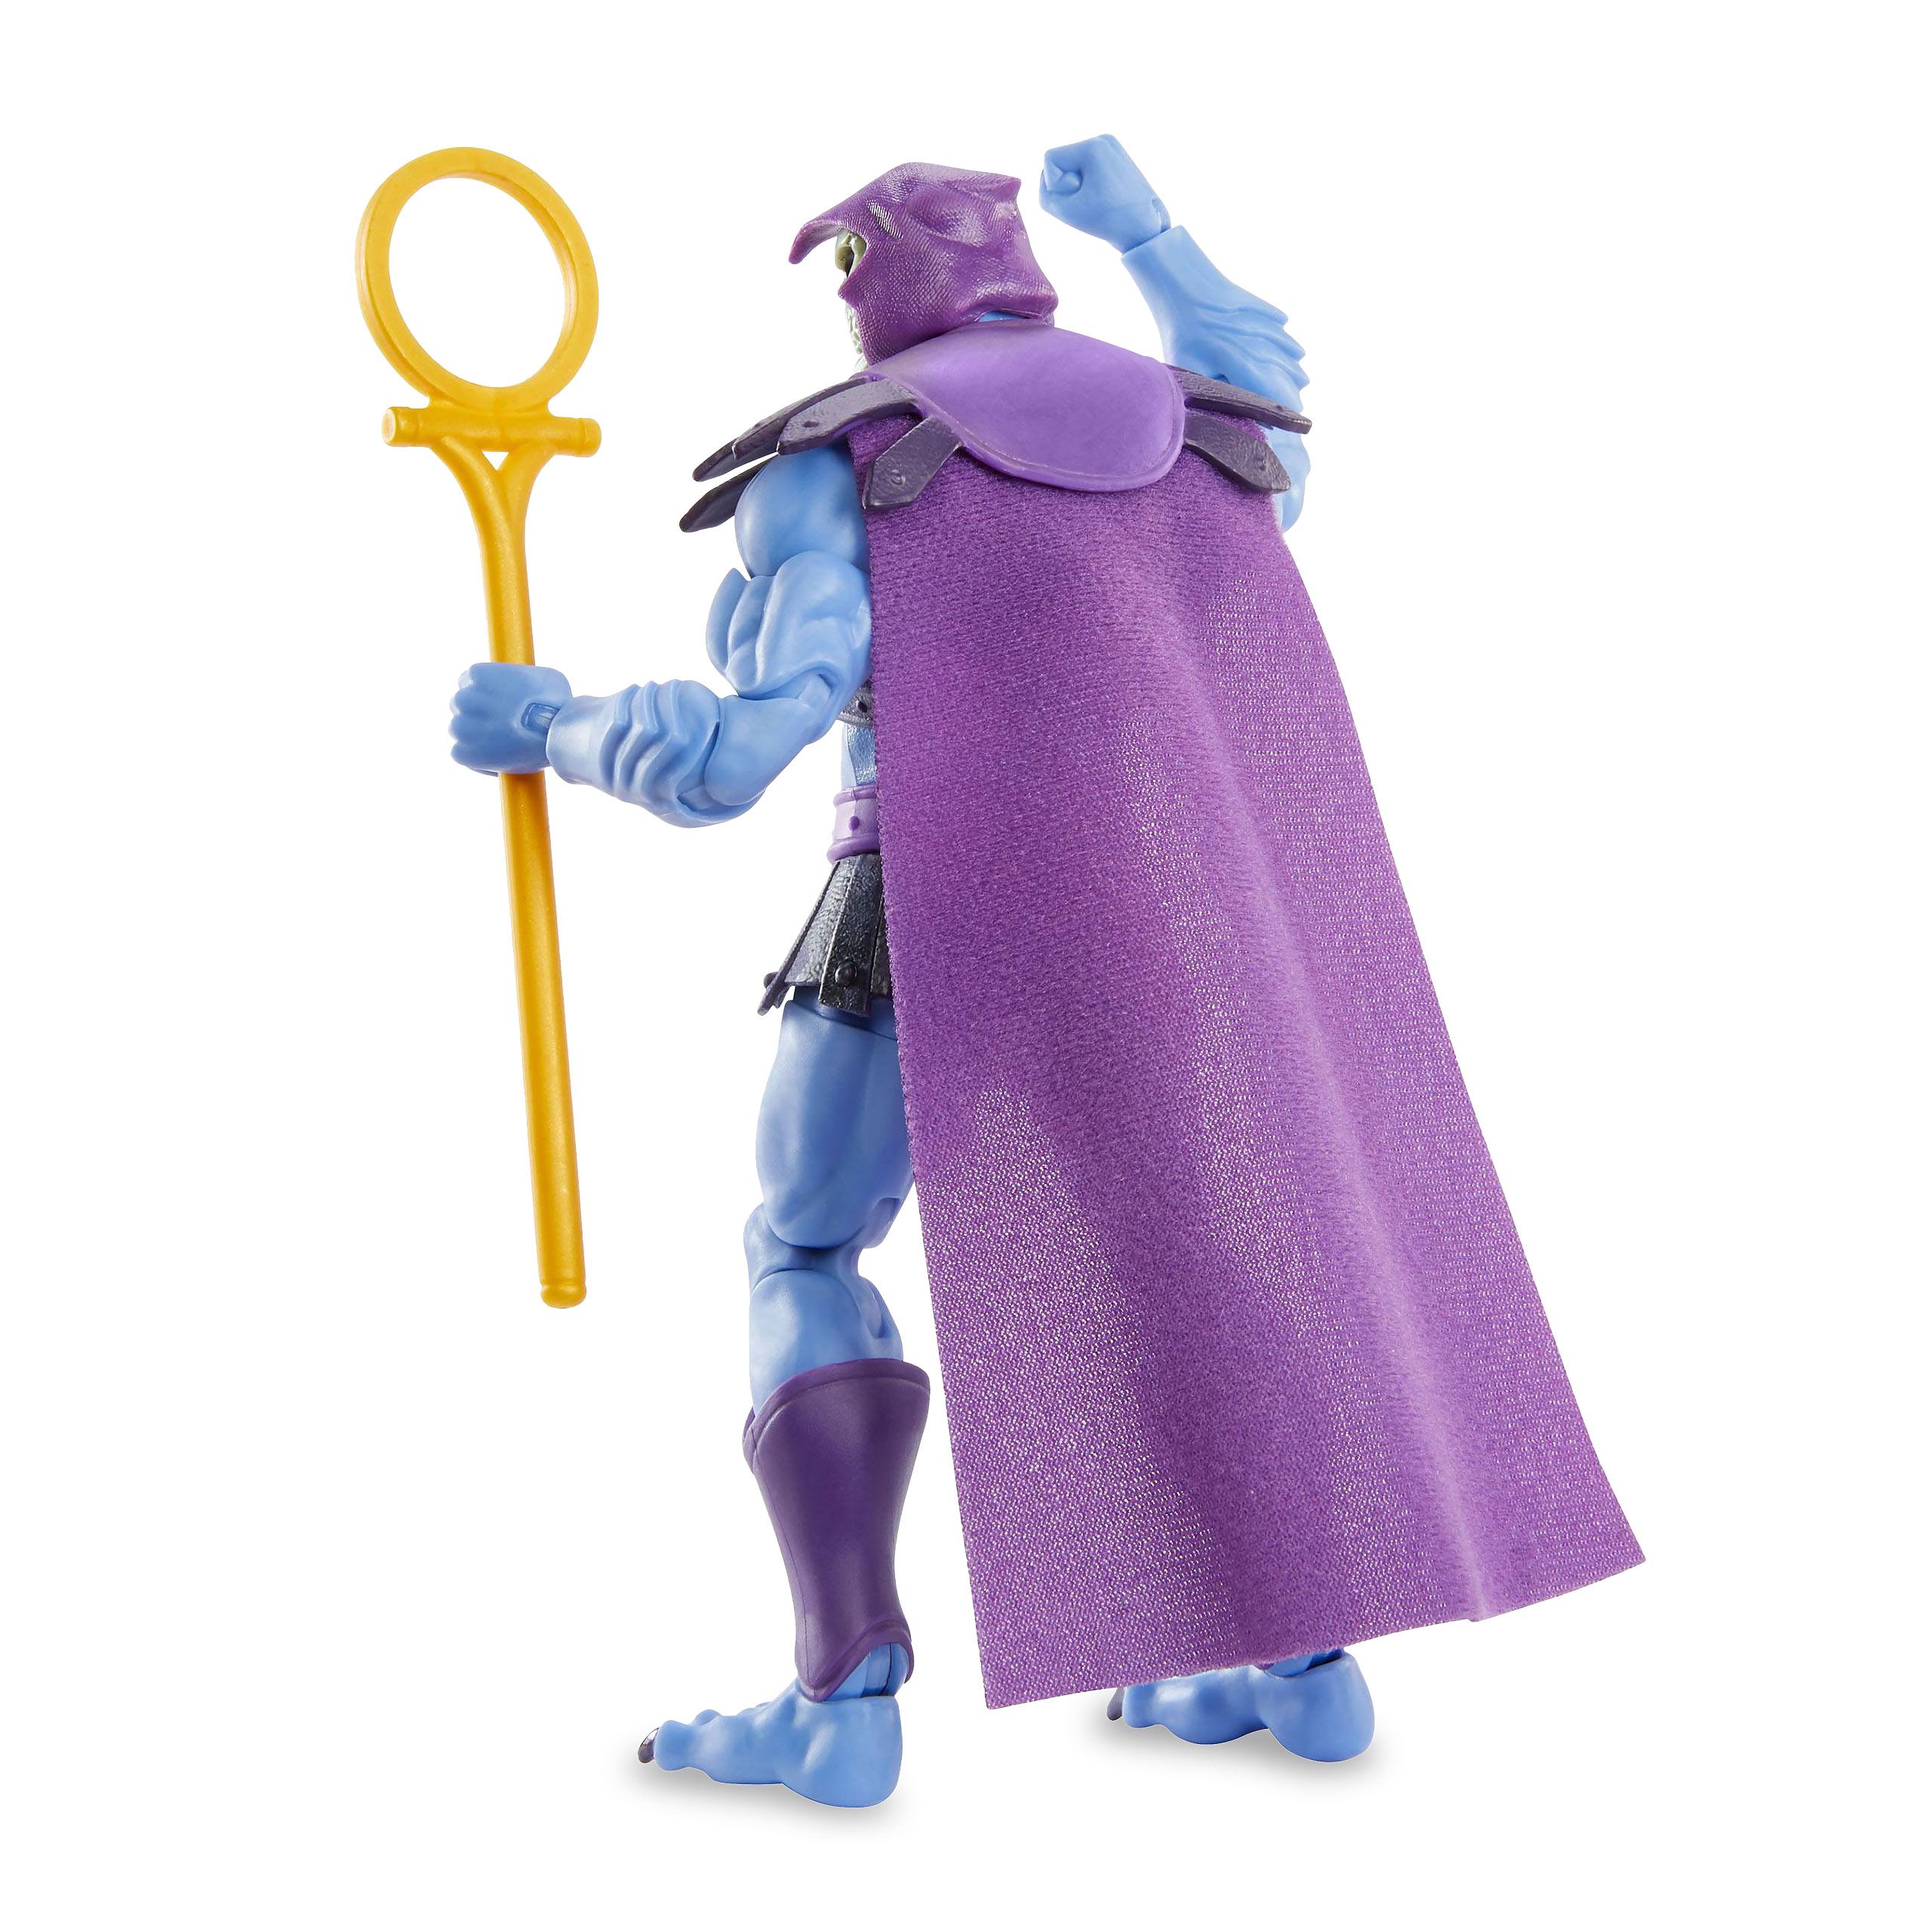 Masters of the Universe - Figurine d'action Skeletor